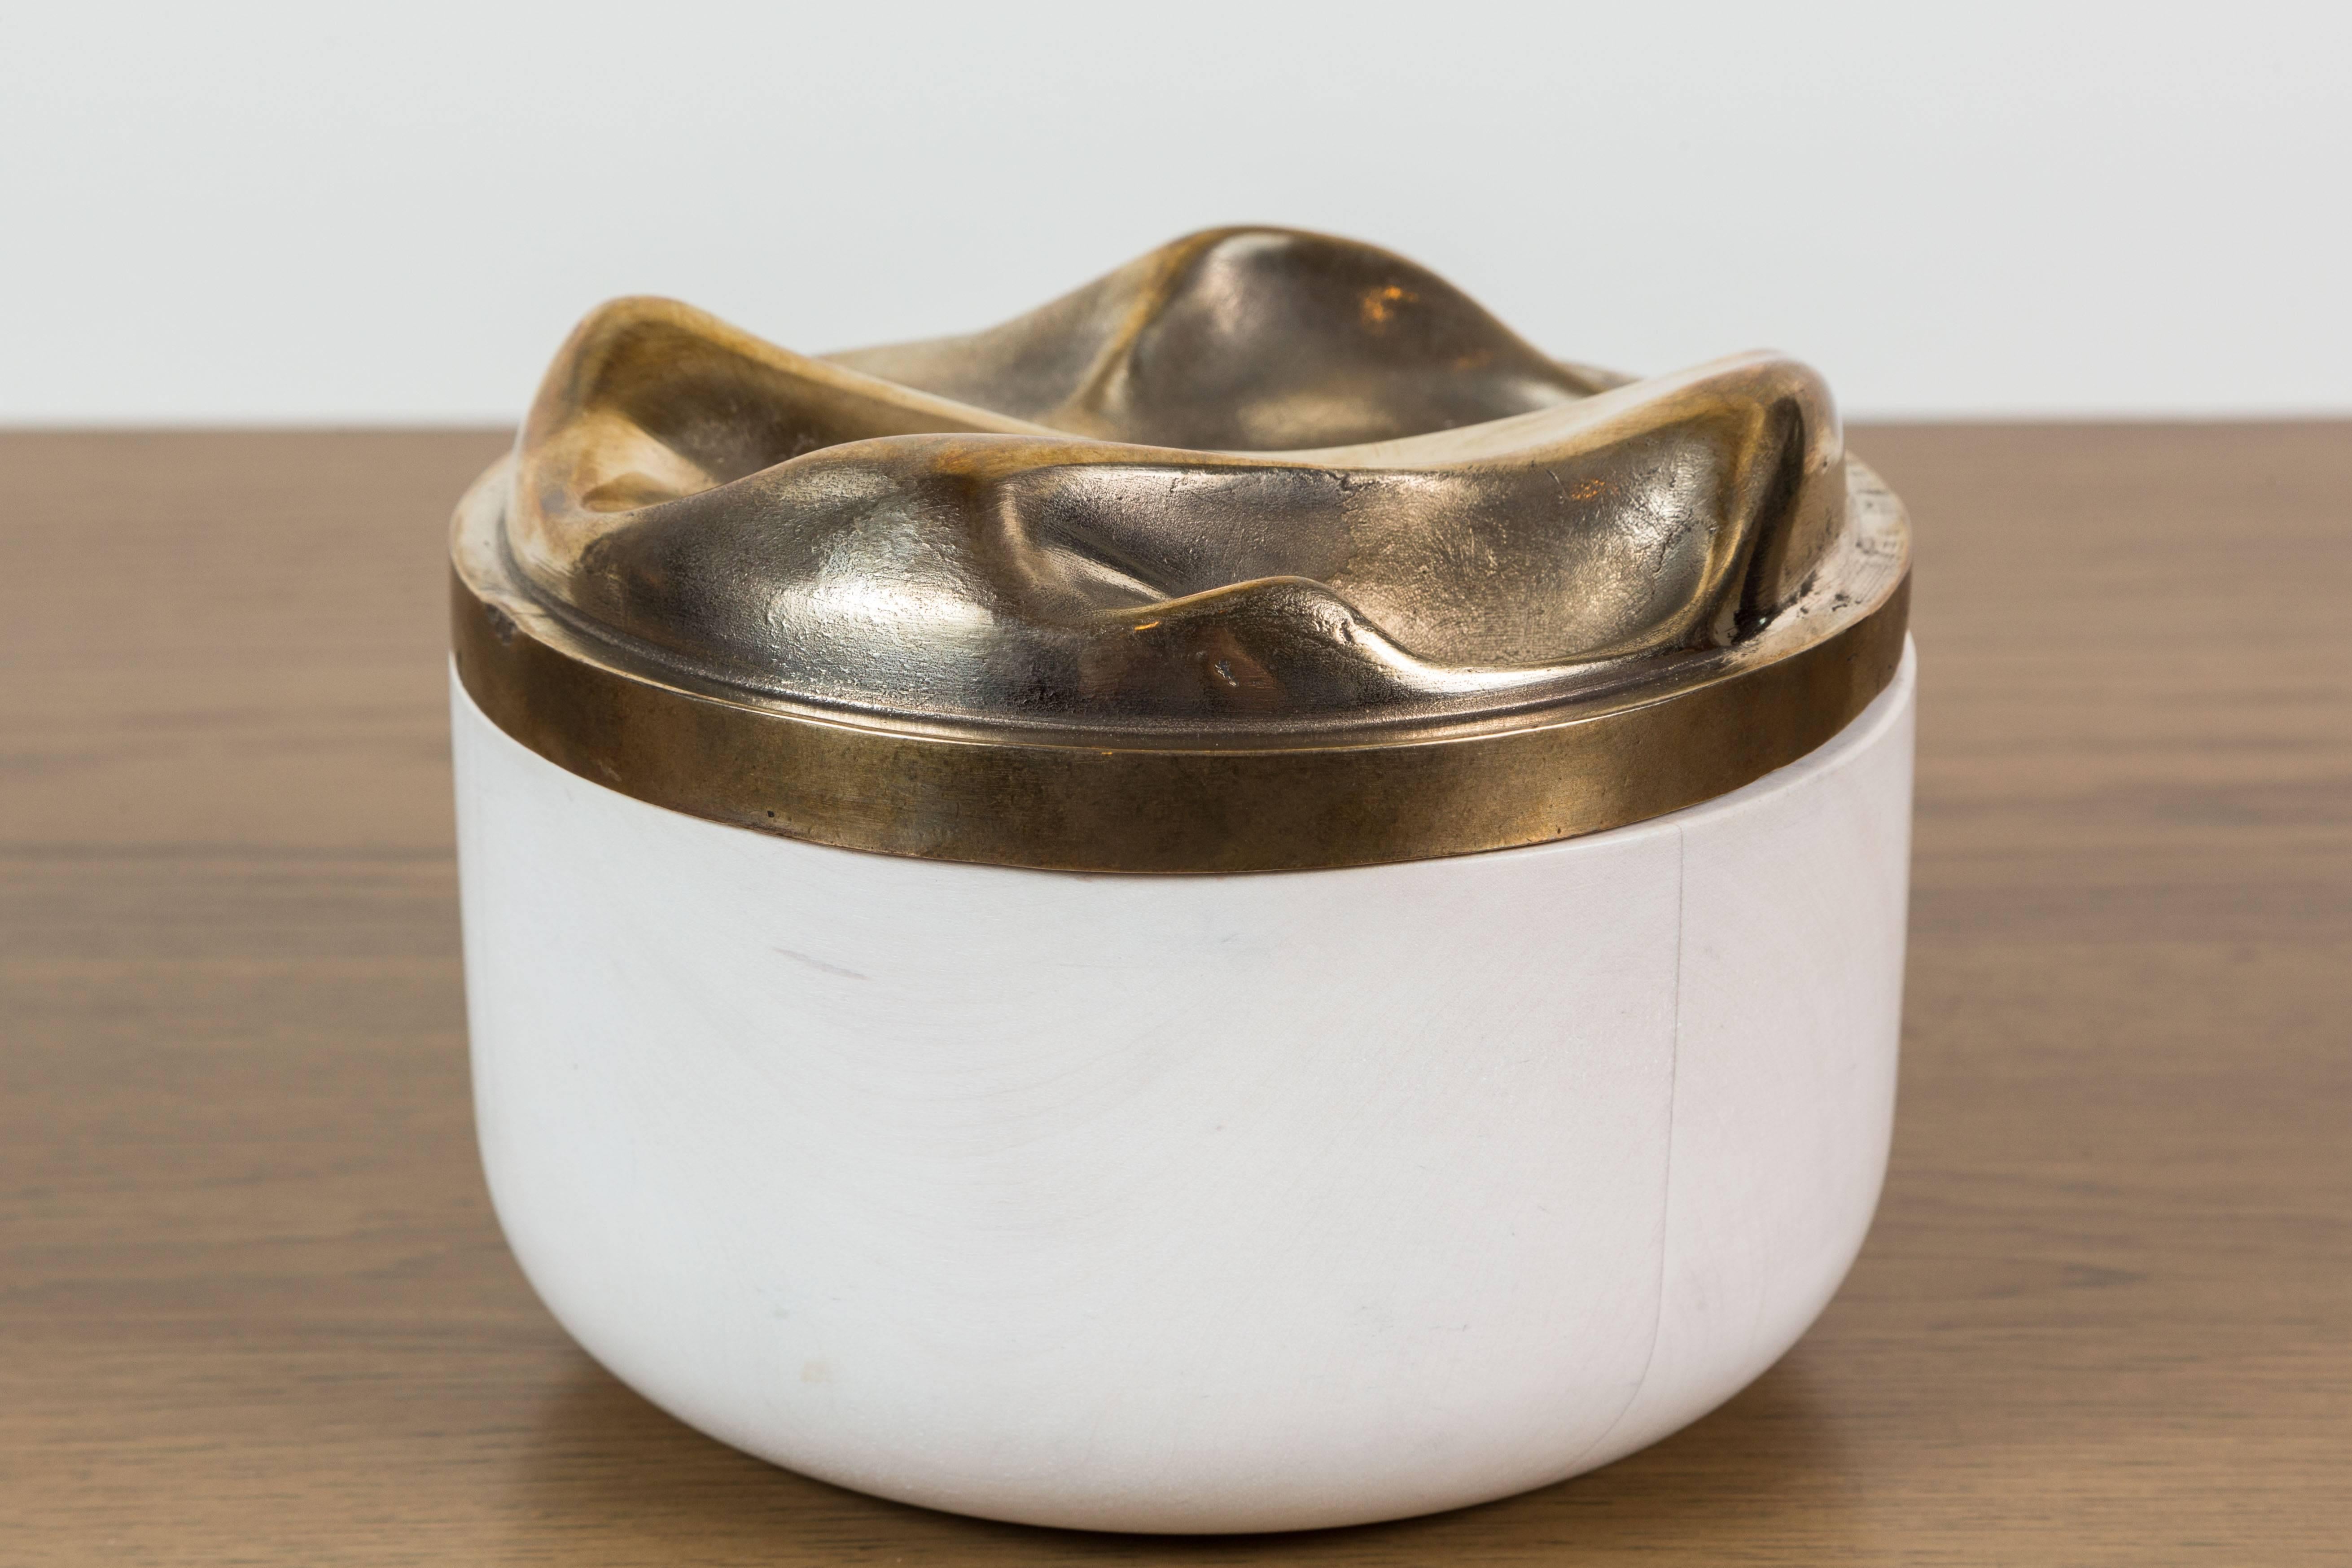 Bleached Maple and Cast Bronze Round Box by artist Vincent Pocsik in collaboration with Lawson-Fenning. Features a sculptural carved wood interior. Made of natural materials, this decorative object can be accessorized on table top, book shelf, or